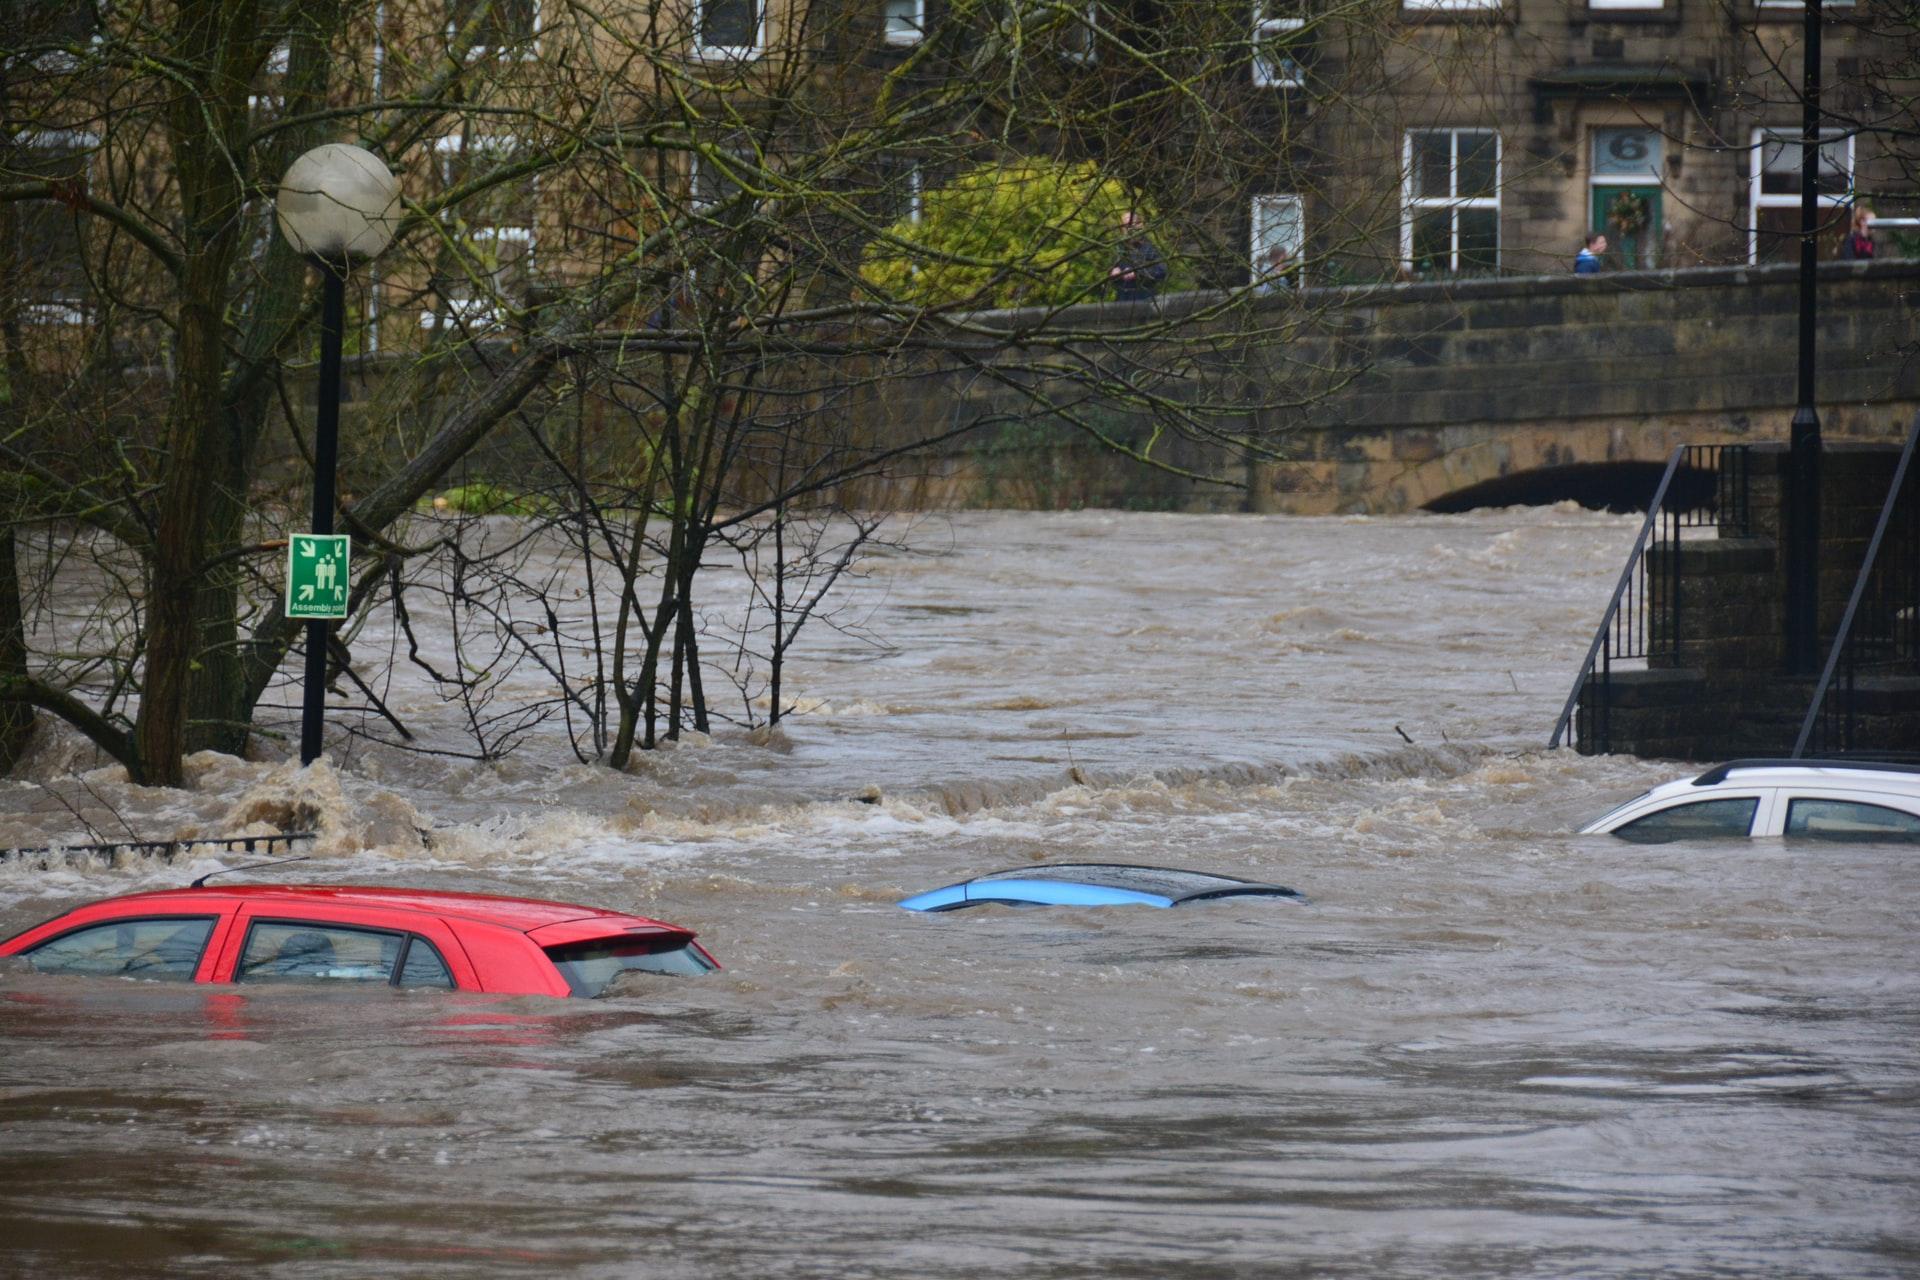 There are key elements to look for to avoid buying flood-damaged vehicles.